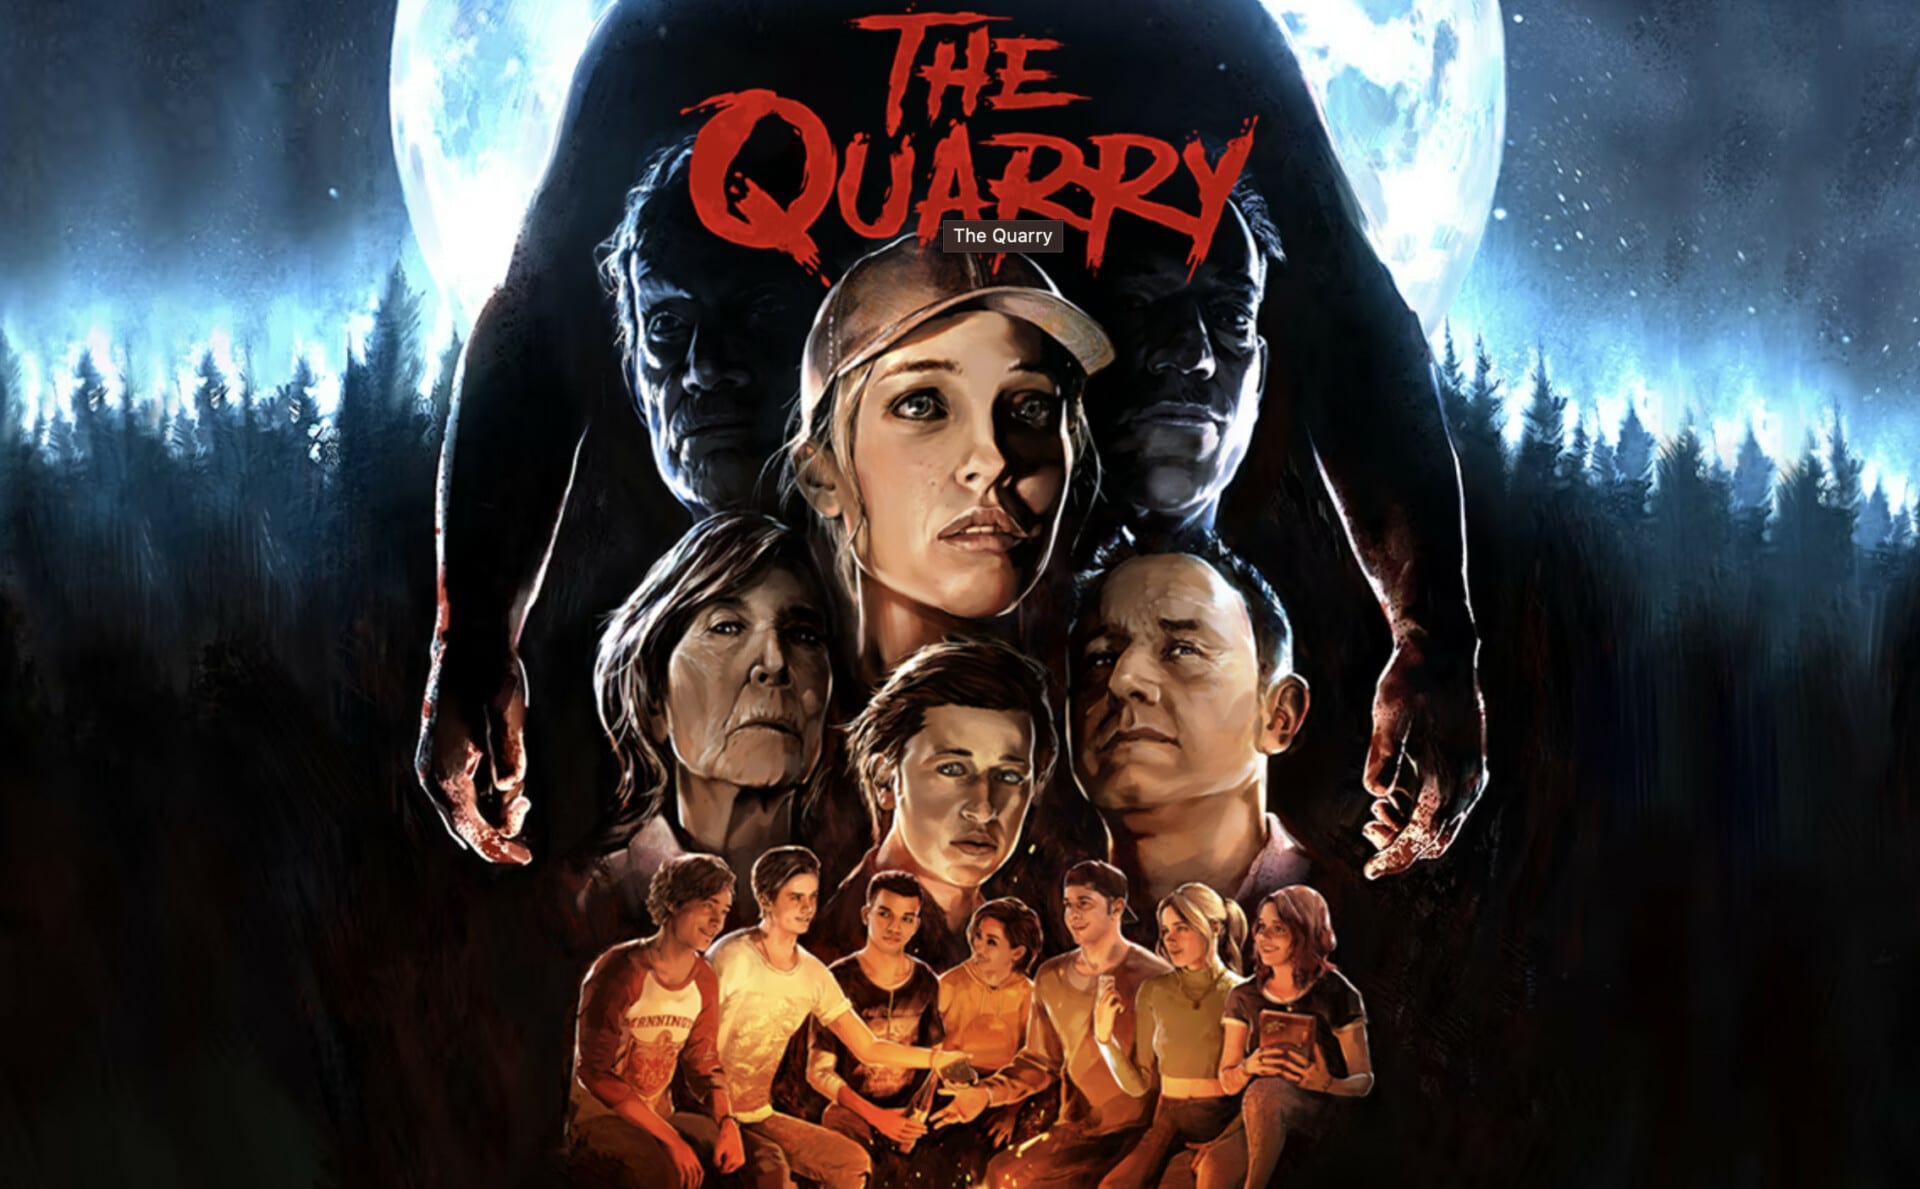 The Quarry is a summer camp game thriller from Supermassive Games and 2K coming june 10 trailer david arquette justice smith brenda song stars cast